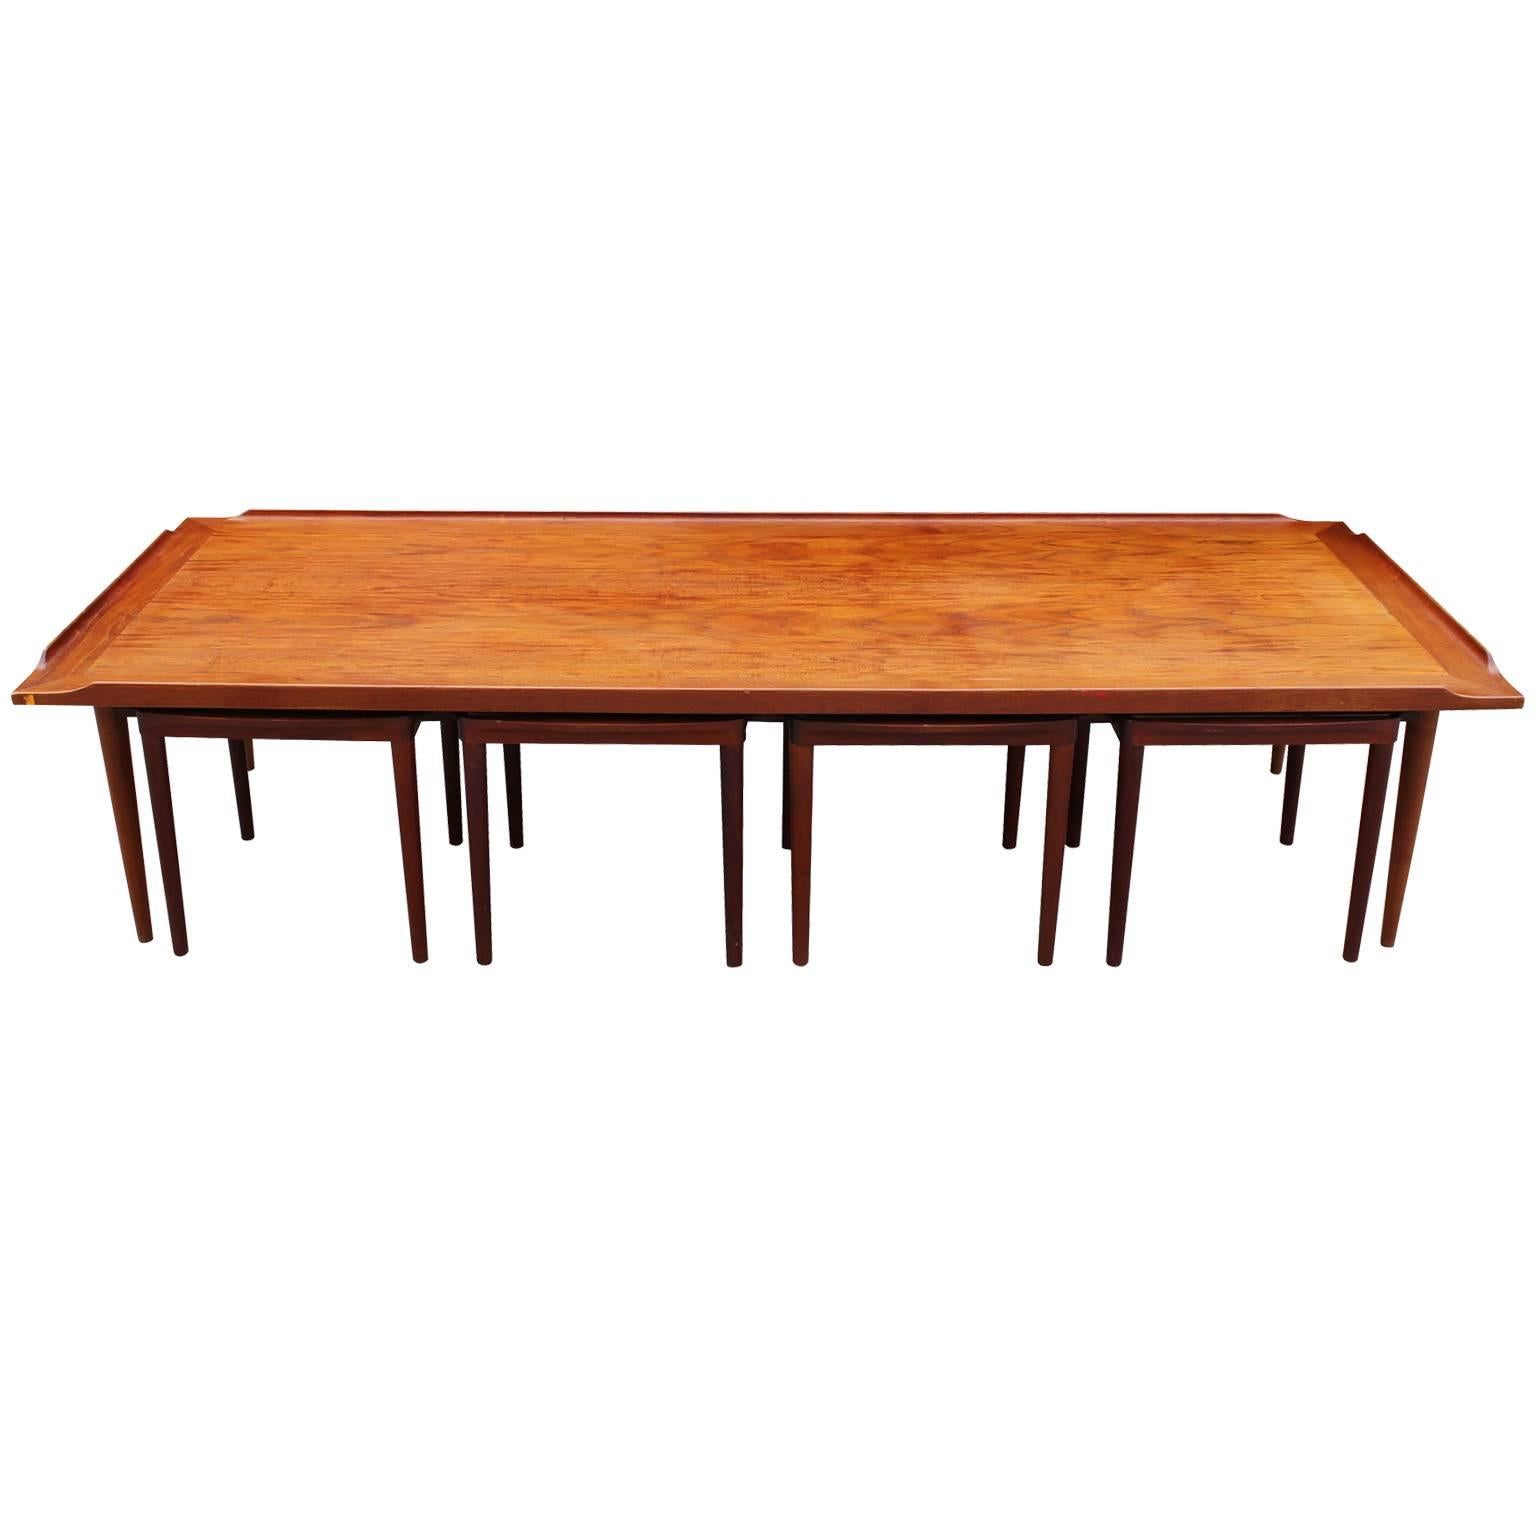 Mid-20th Century Mid Century Modern Danish Coffee Table with Reversible Stools / Tables